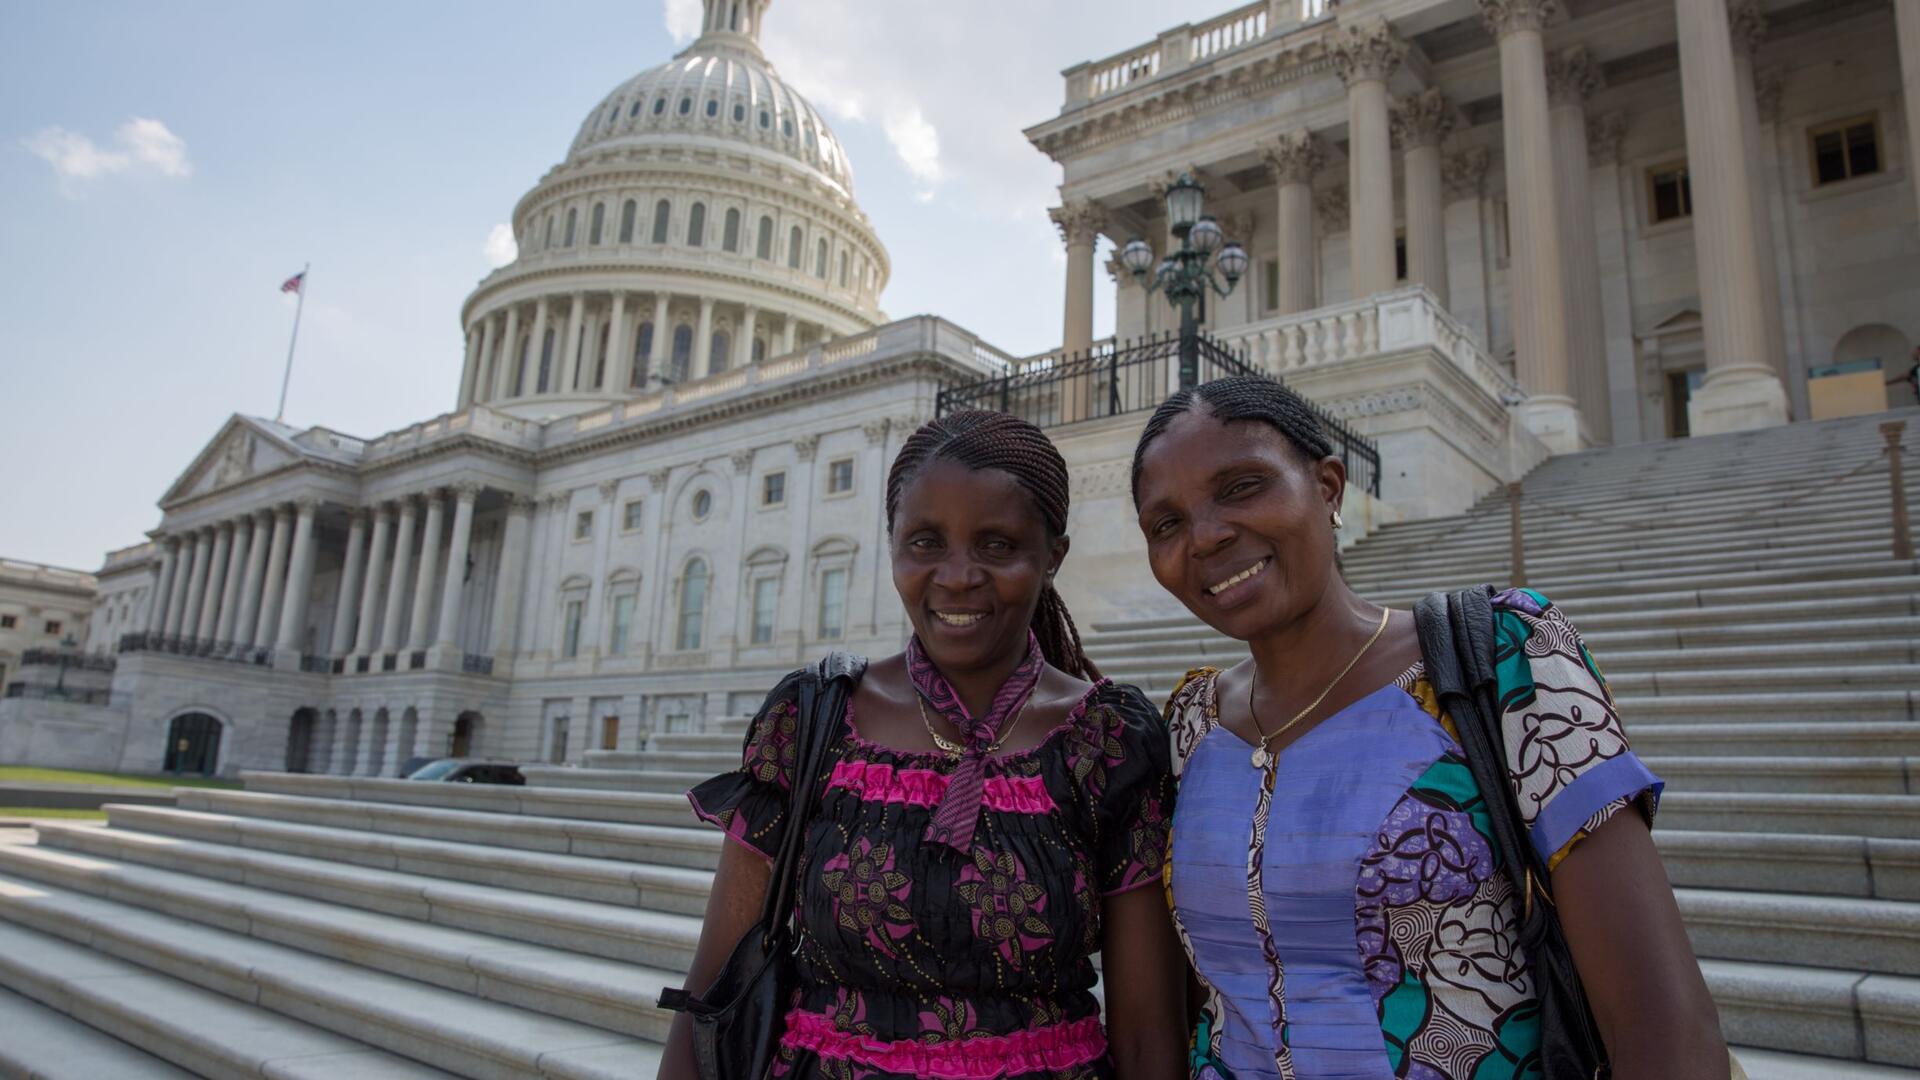 Two female women's rights activists from the Democratic Republic of Congo stand on the steps of the U.S. Capitol on a visit to Washington, DC in 2016